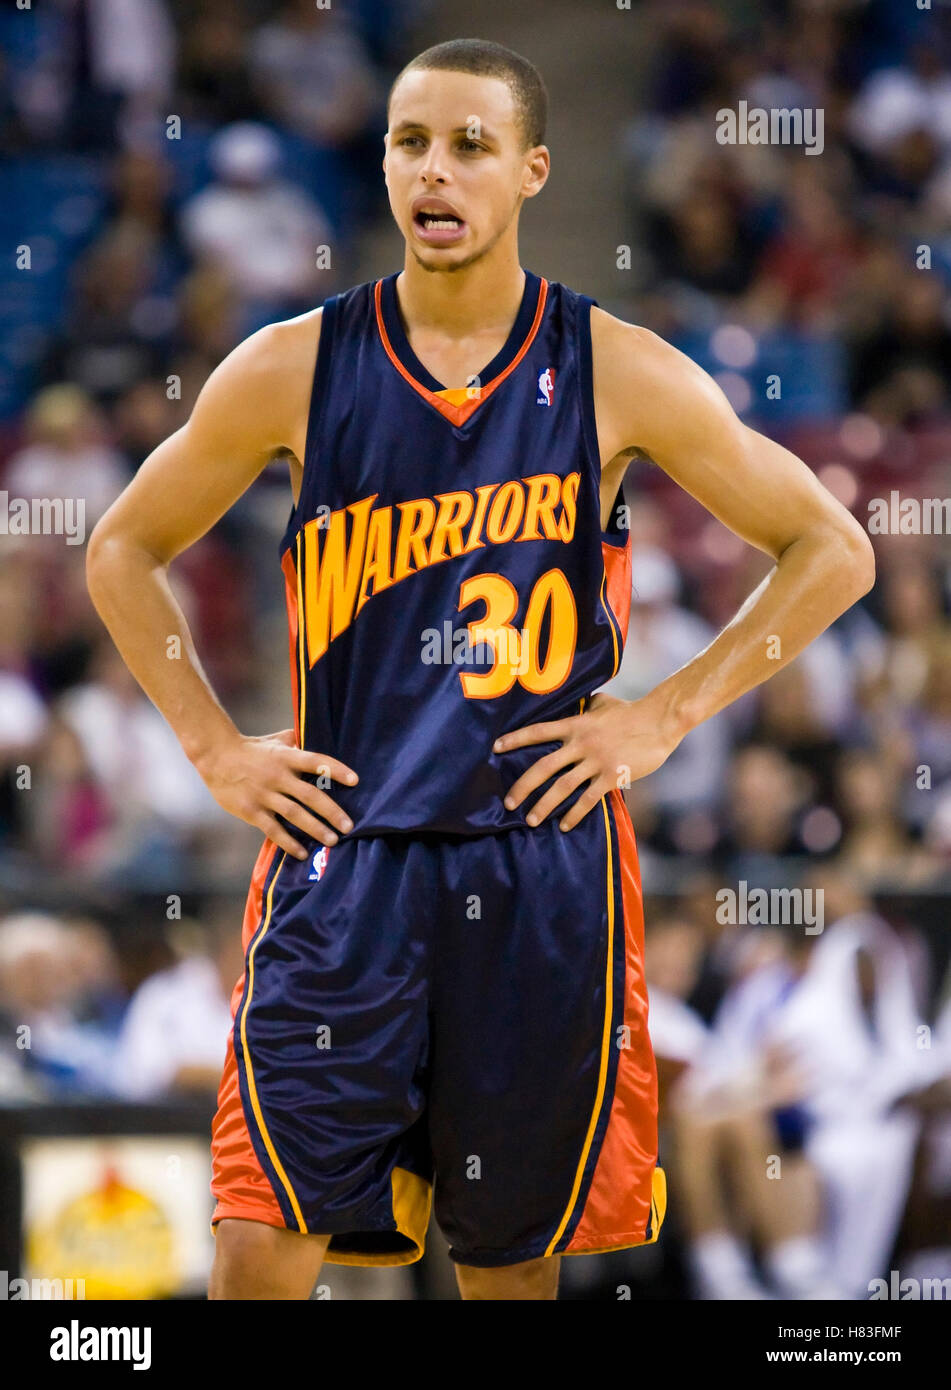 Steph Curry 2009-2010 Golden State Warriors